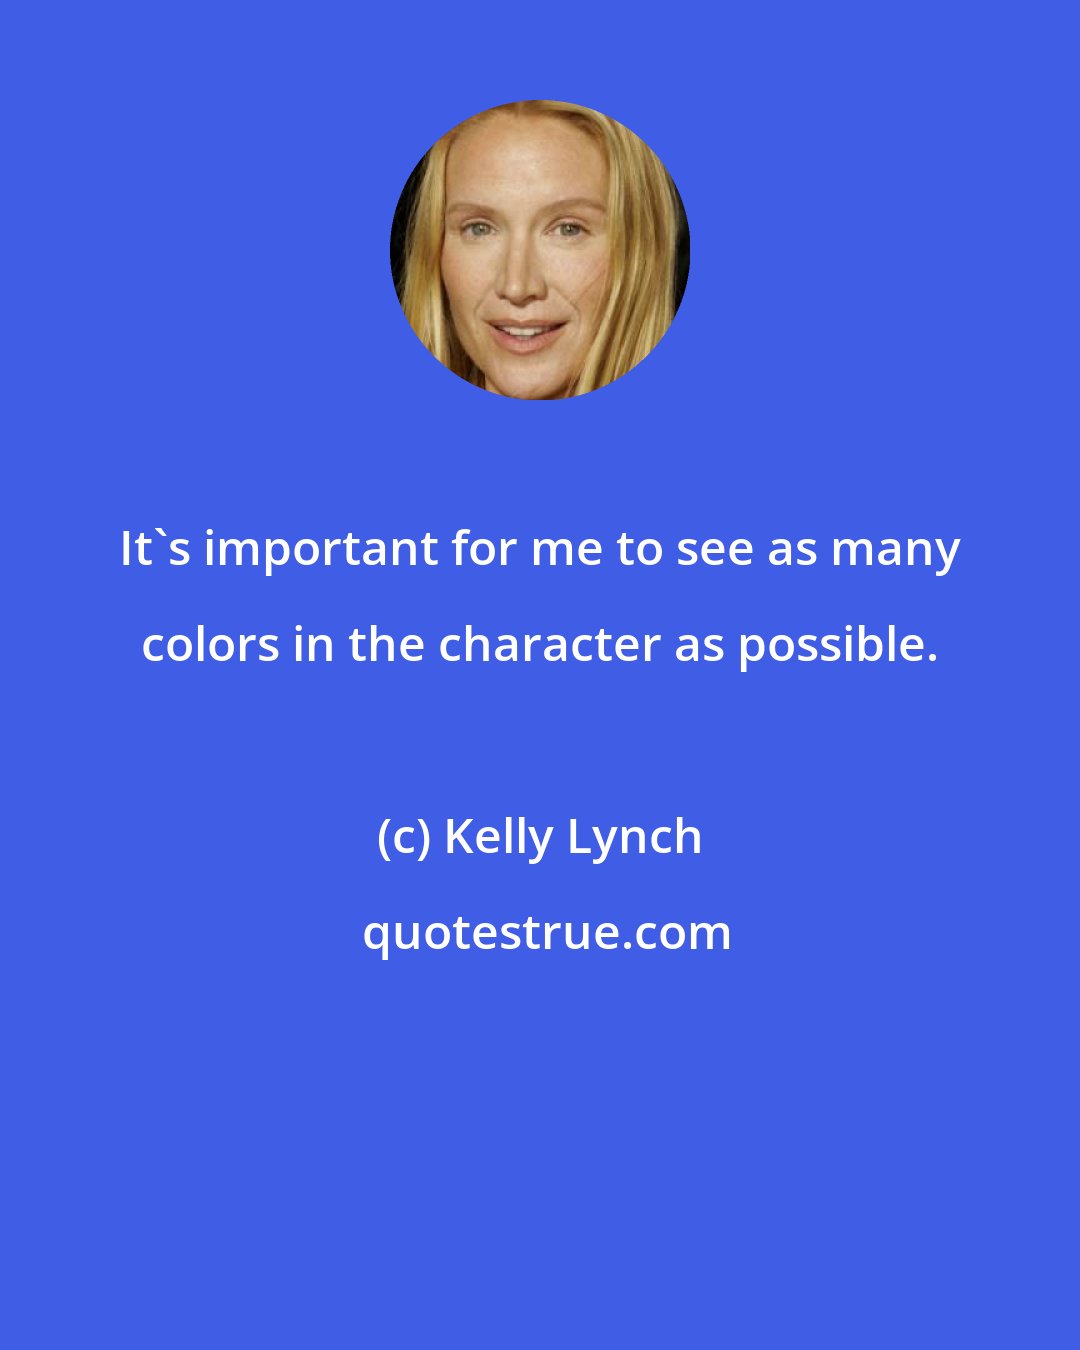 Kelly Lynch: It's important for me to see as many colors in the character as possible.